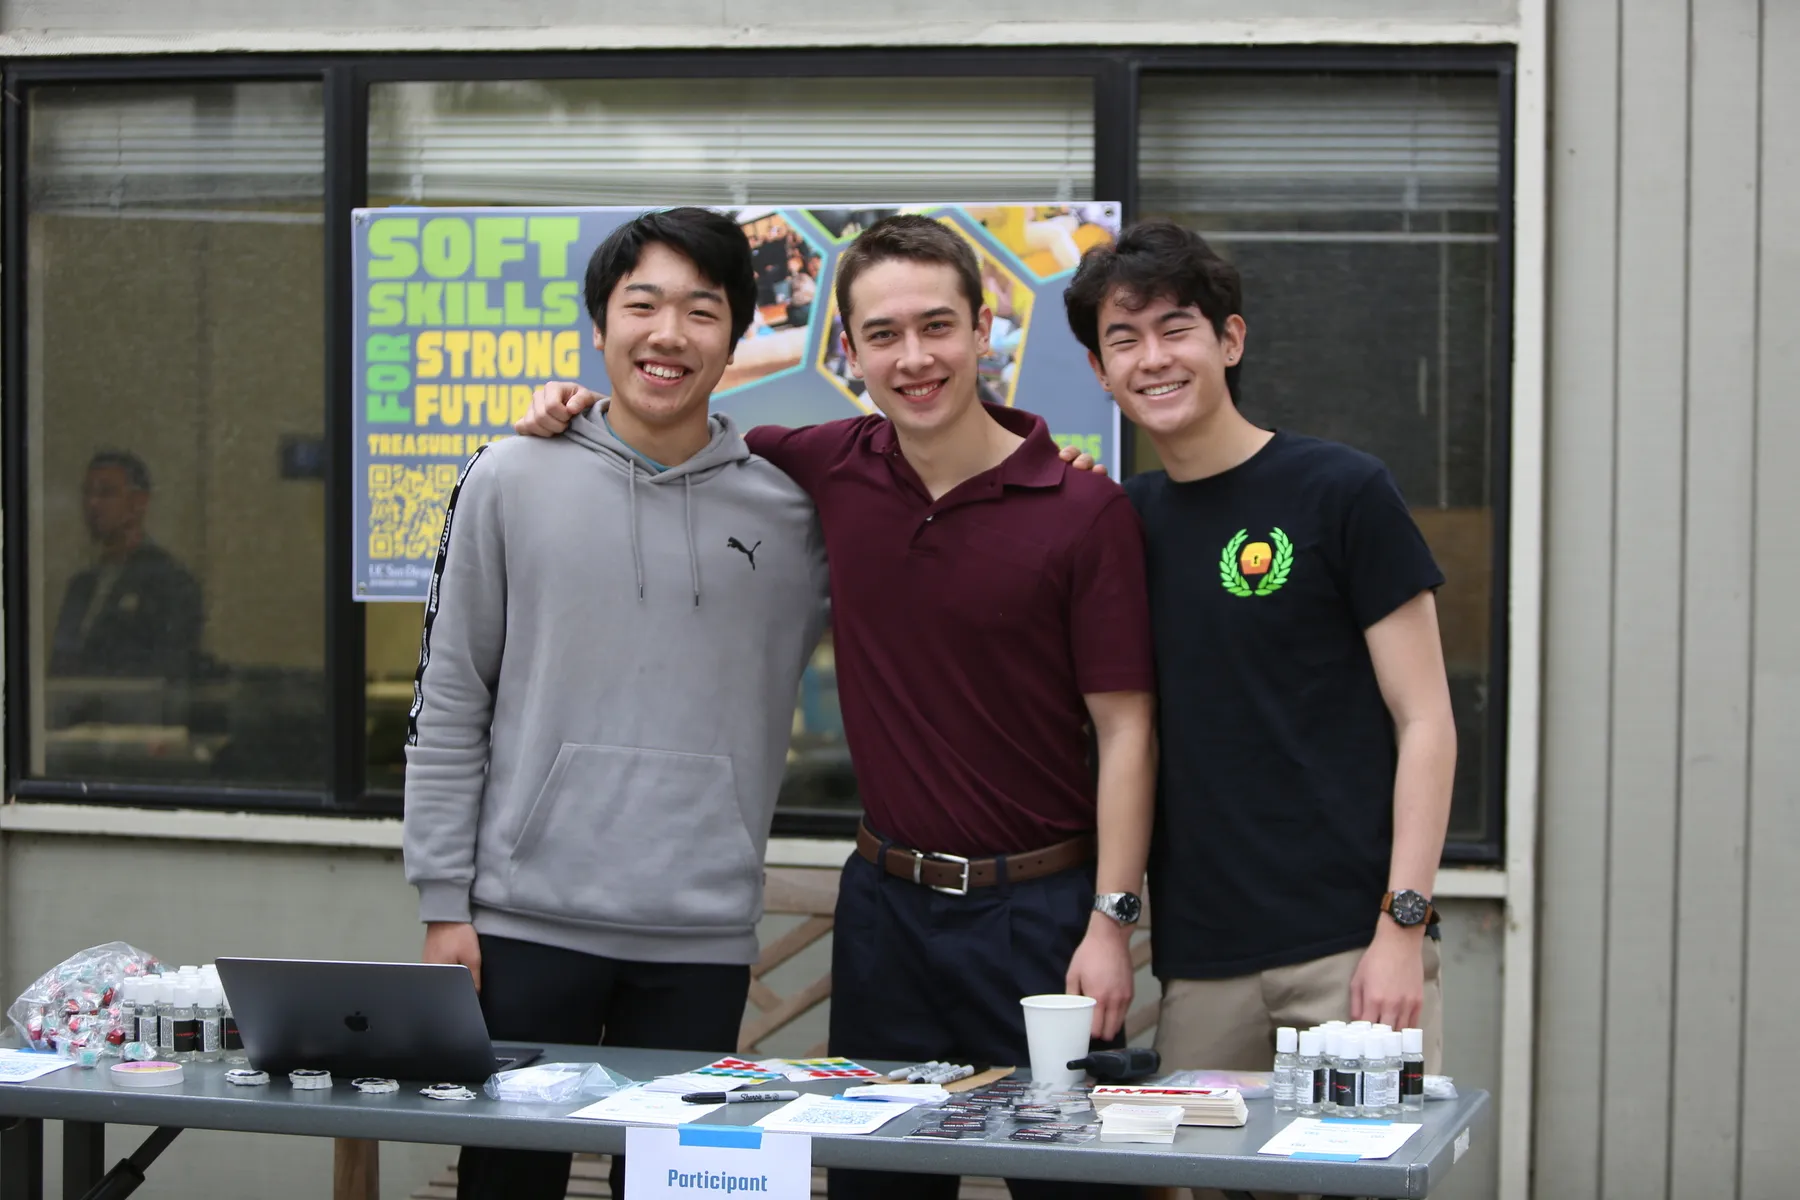 Ethan Xie, Ethan Kosaki, and Brandon Joe at the beginning of the event